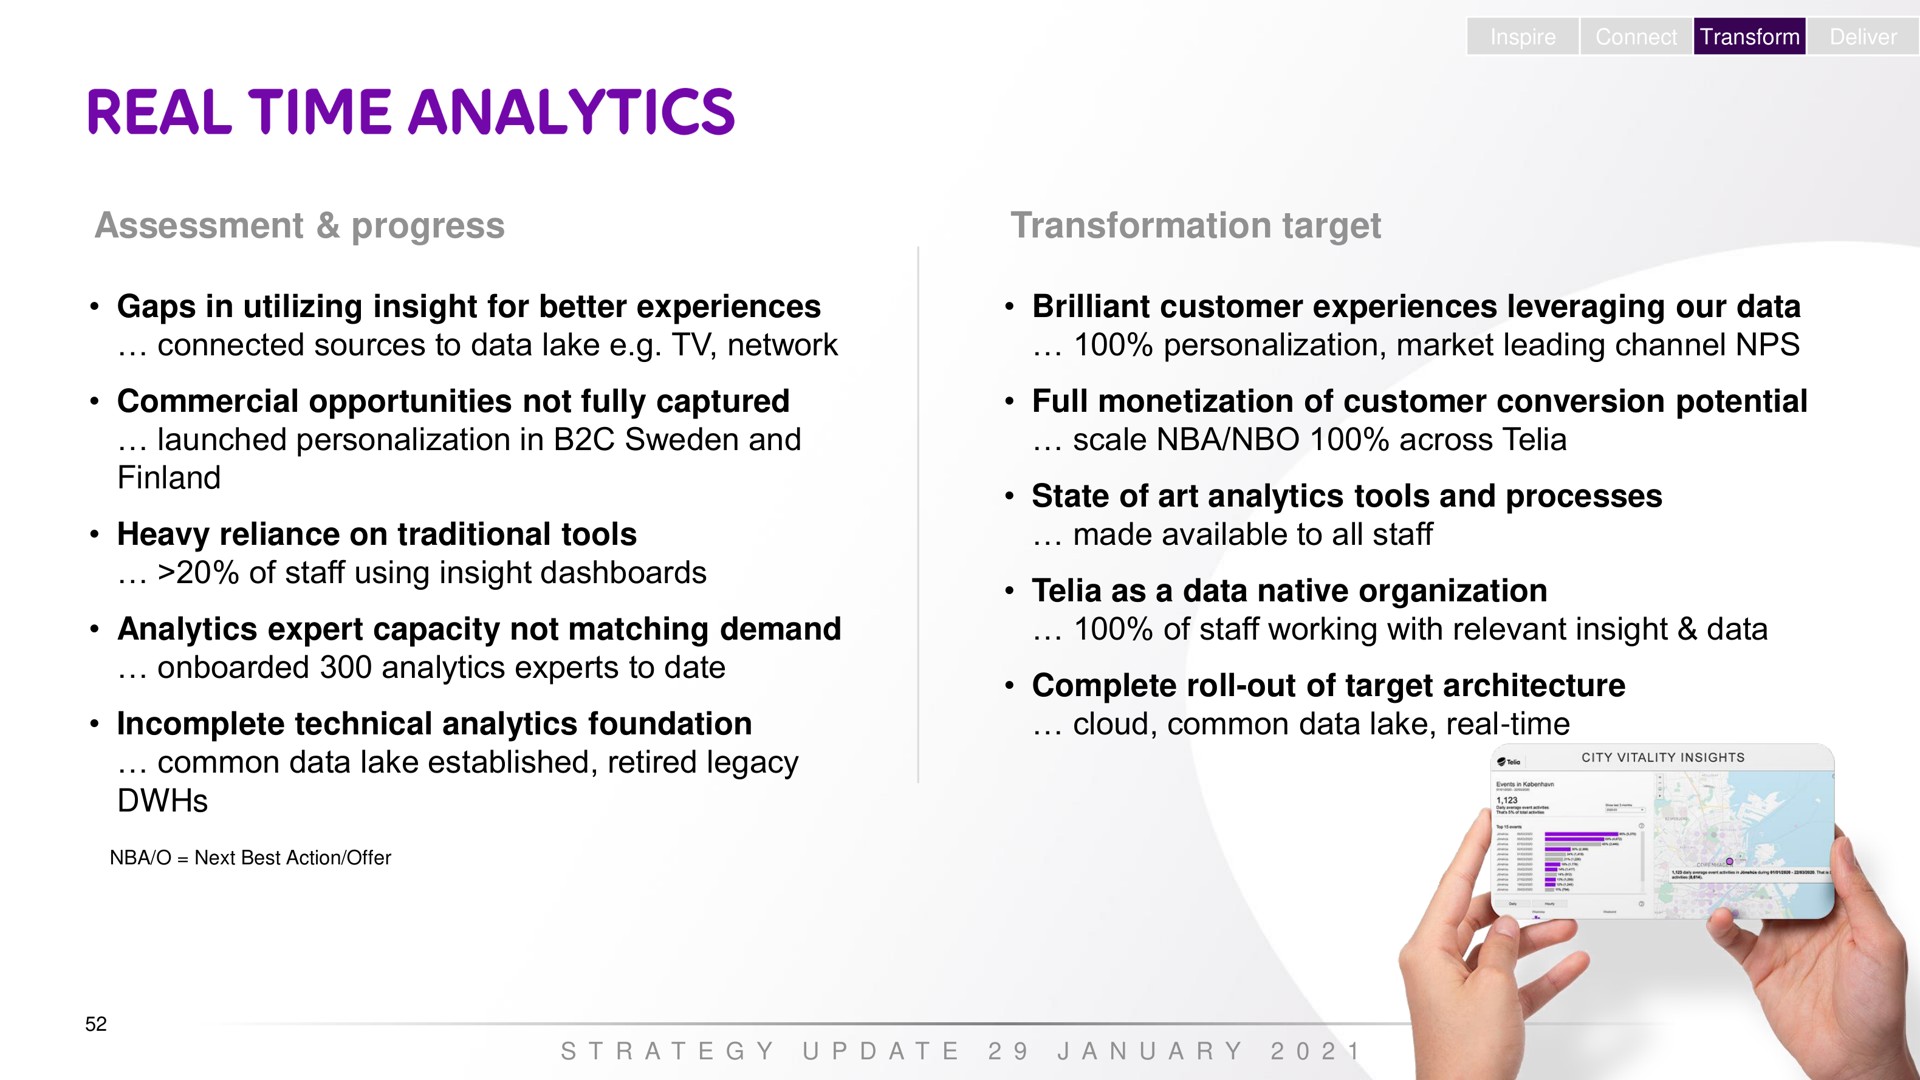 inspire connect transform deliver assessment progress transformation target gaps in utilizing insight for better experiences connected sources to data lake network brilliant customer experiences leveraging our data personalization market leading channel commercial opportunities not fully captured full monetization of customer conversion potential launched personalization in and finland heavy reliance on traditional tools of staff using insight dashboards scale across state of art analytics tools and processes made available to all staff as a data native organization analytics expert capacity not matching demand of staff working with relevant insight data analytics experts to date incomplete technical analytics foundation common data lake established retired legacy complete roll out of target architecture cloud common data lake real time a a a a real time | Telia Company